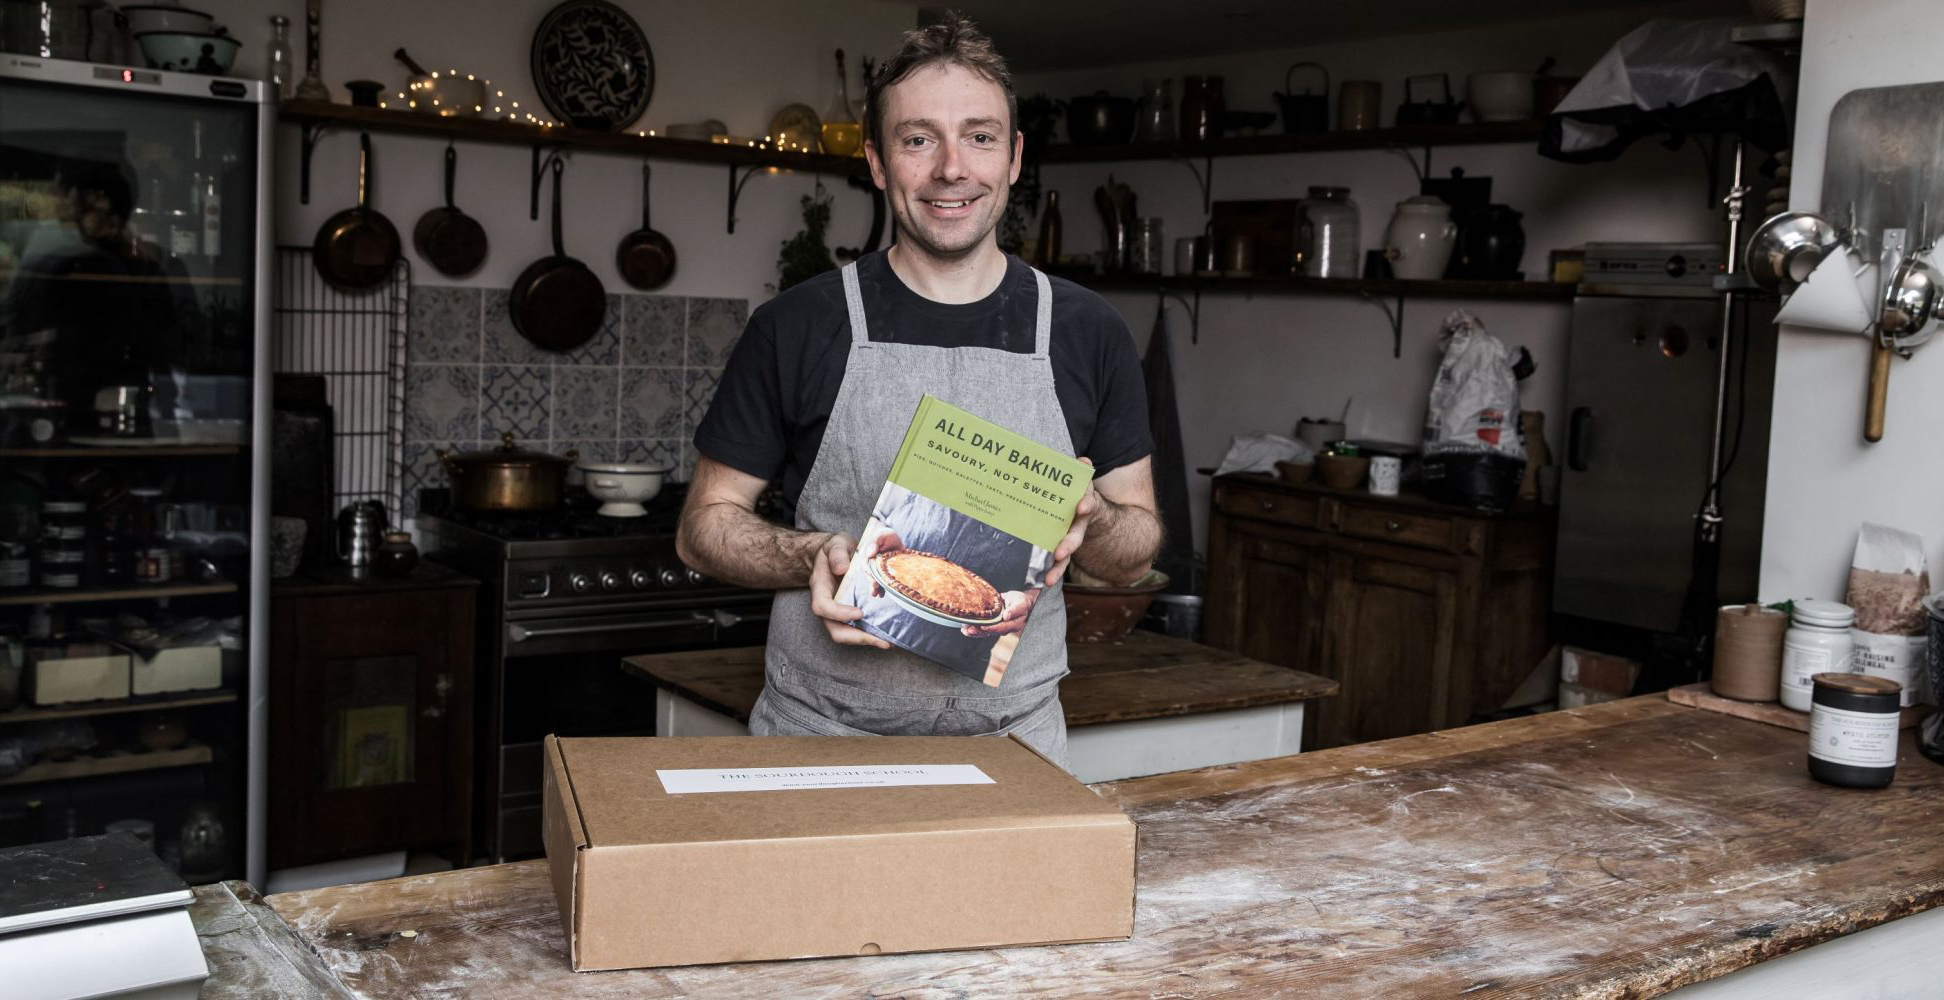 Michael James All Day Baking - Michael with the book